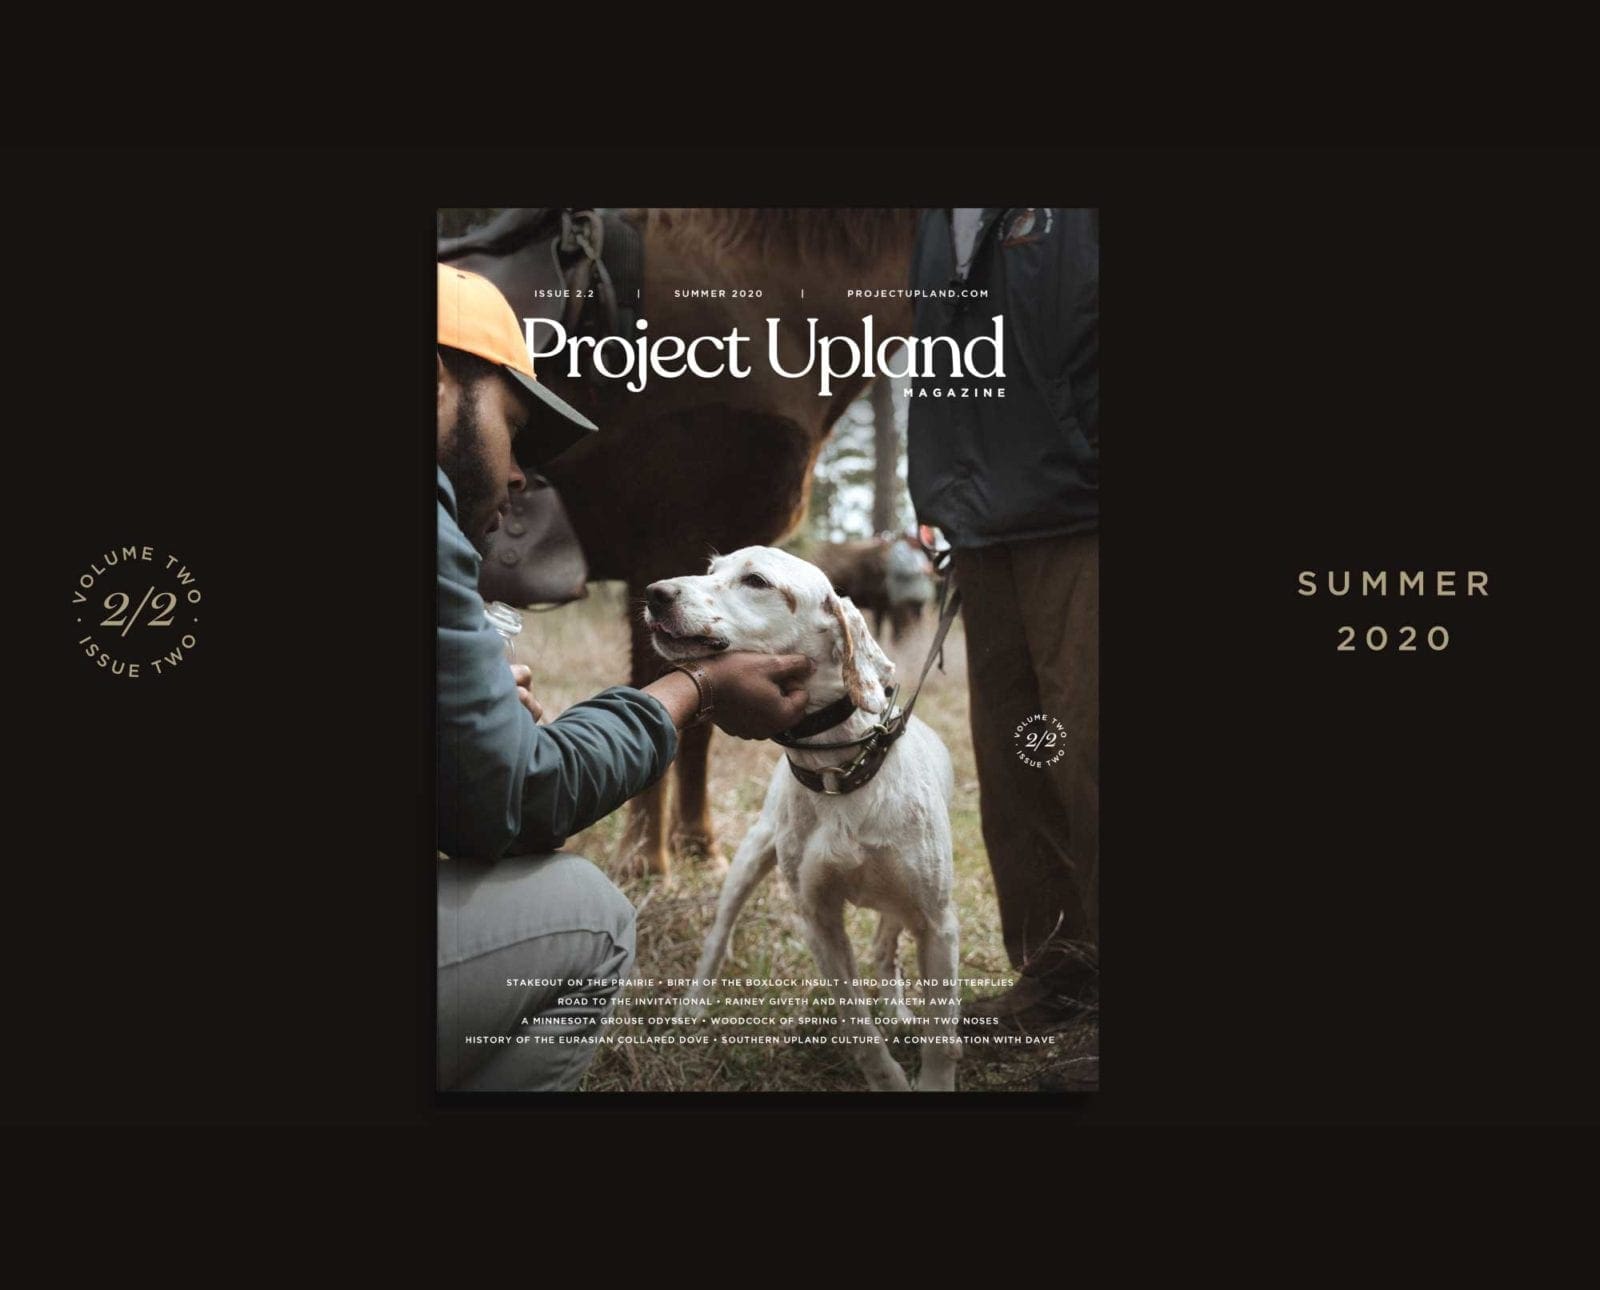 Front cover of Project Upland Magazine featuring the black handlers club.